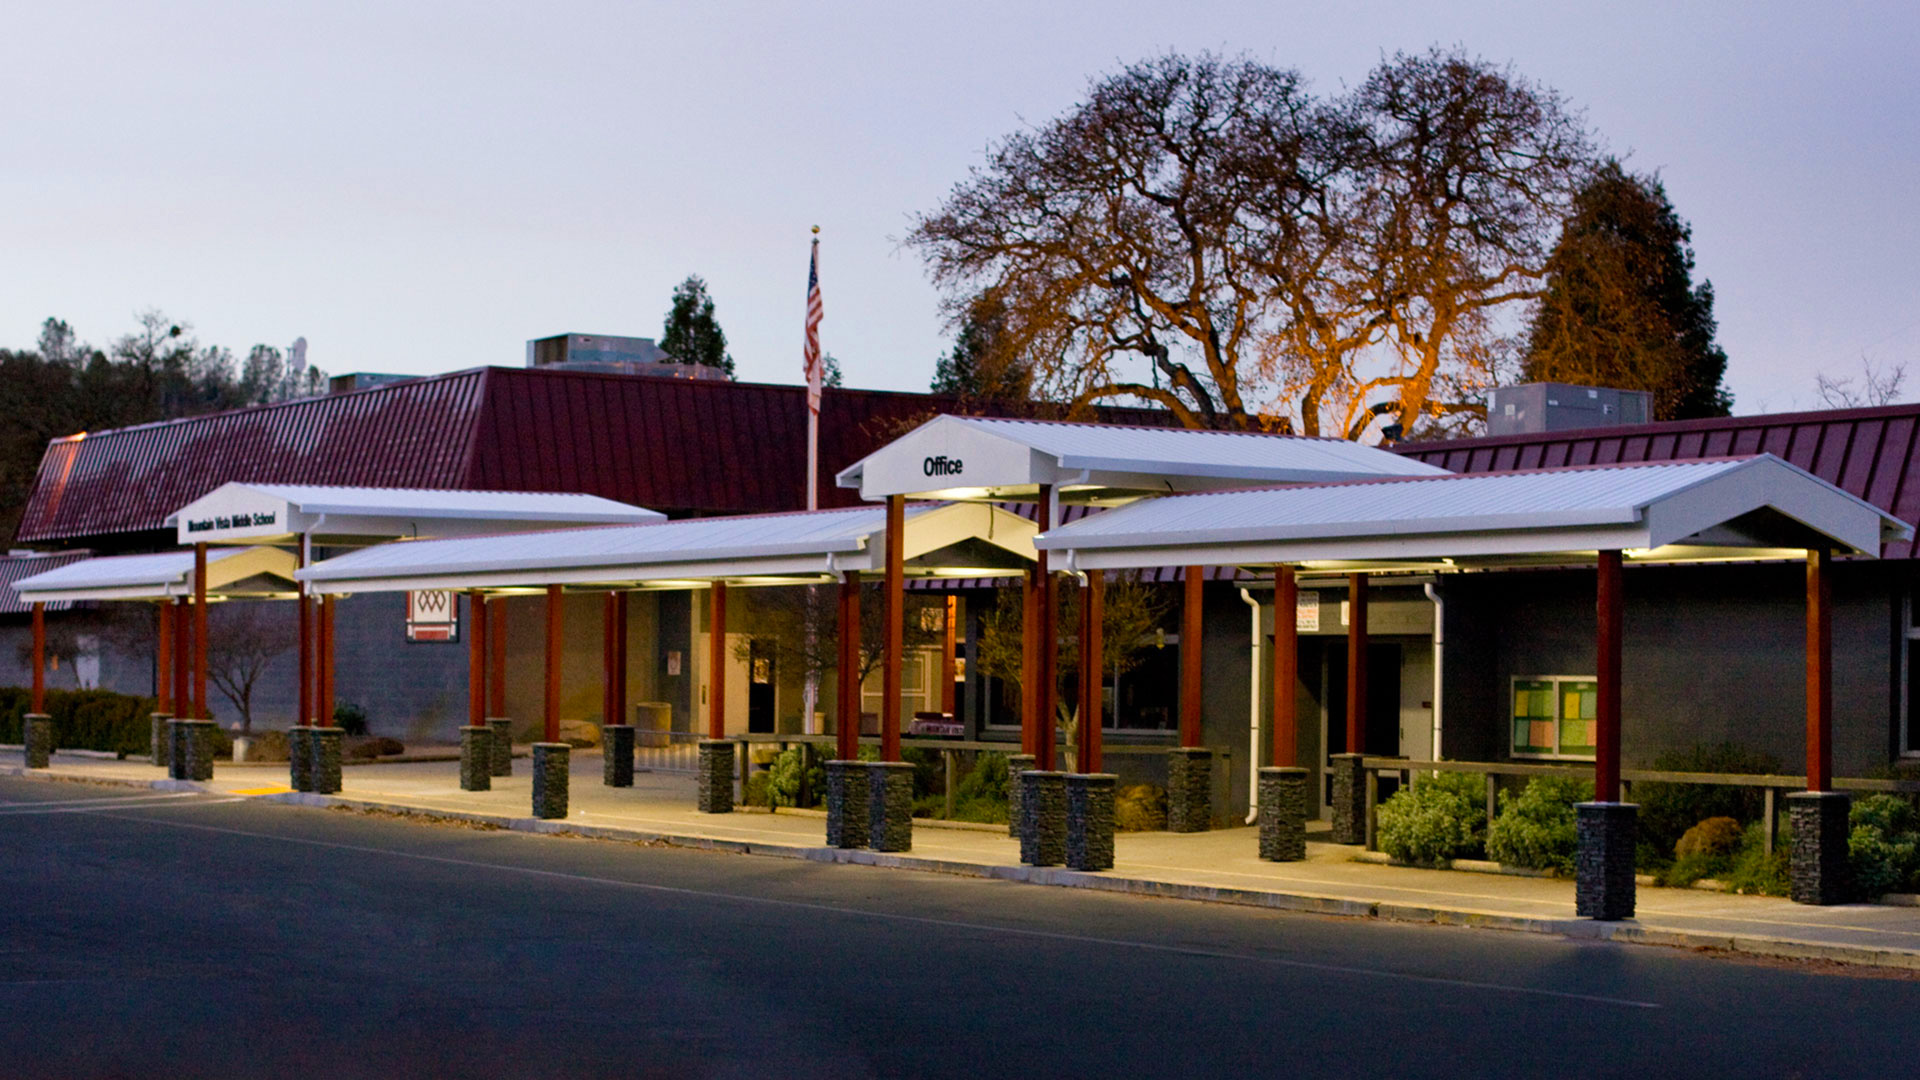 Metal shade structure at dusk, with red posts and white tops, with 'Office' lettered at the secondary entrance.